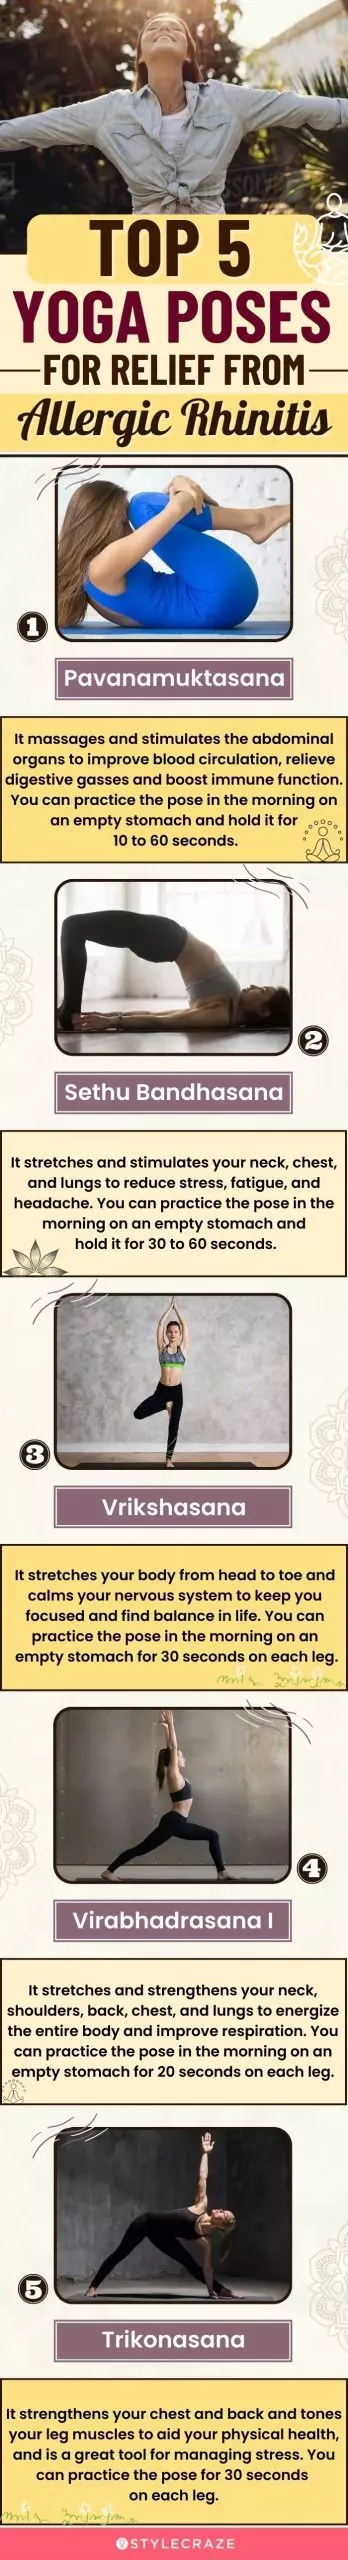 top 5 yoga poses for relief from allergic rhinitis (infographic)